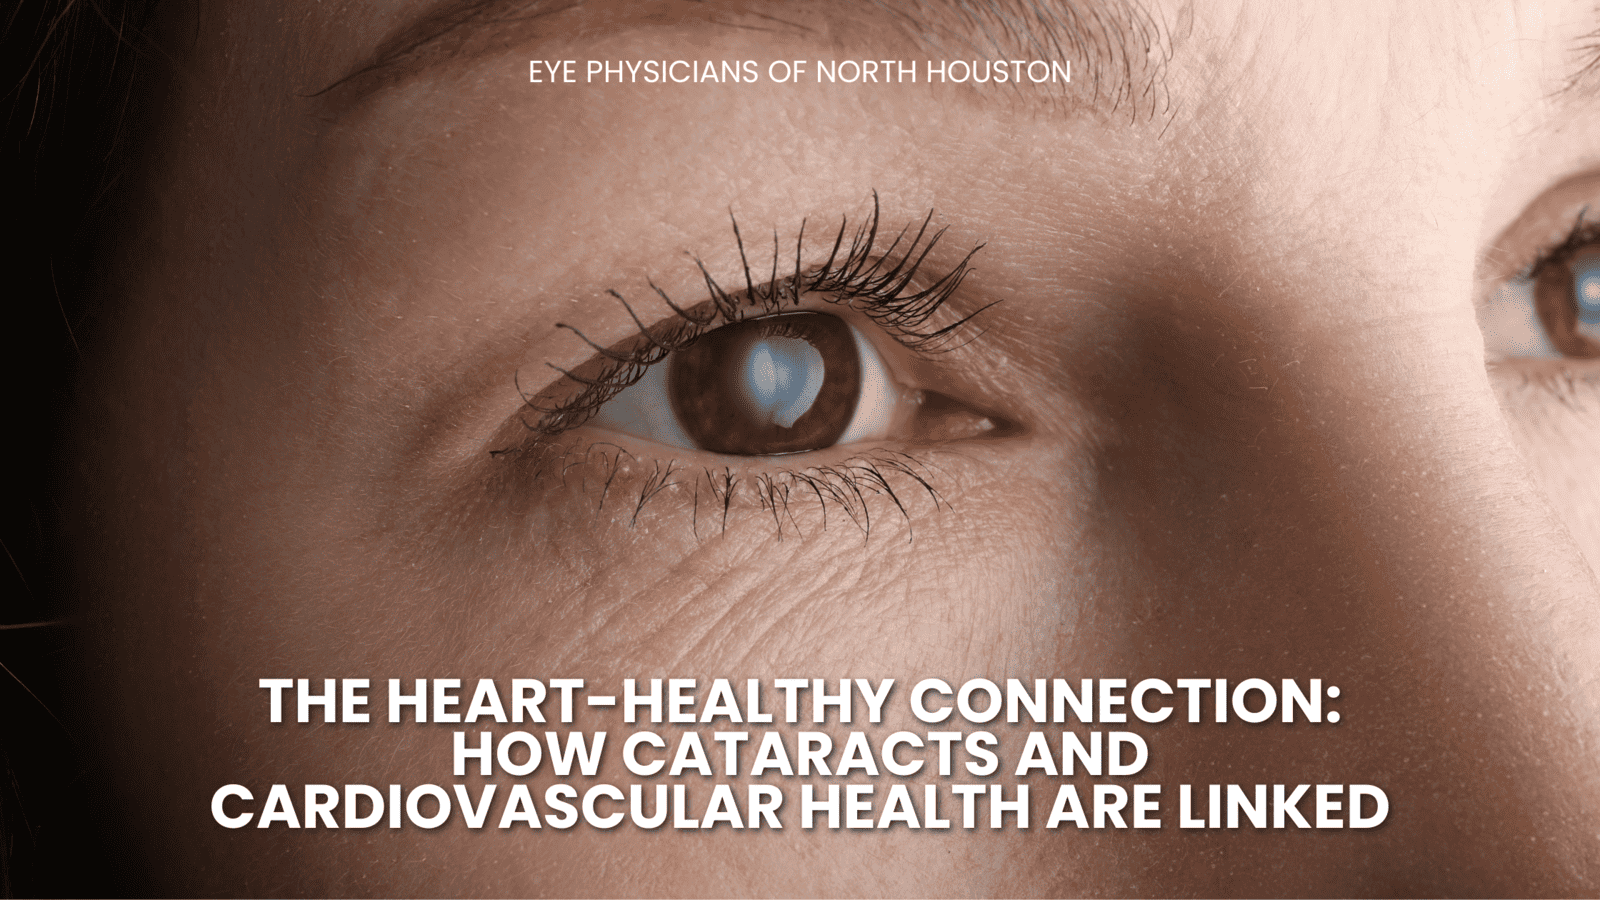 The Heart-Healthy Connection: How Cataracts and Cardiovascular Health Are Linked